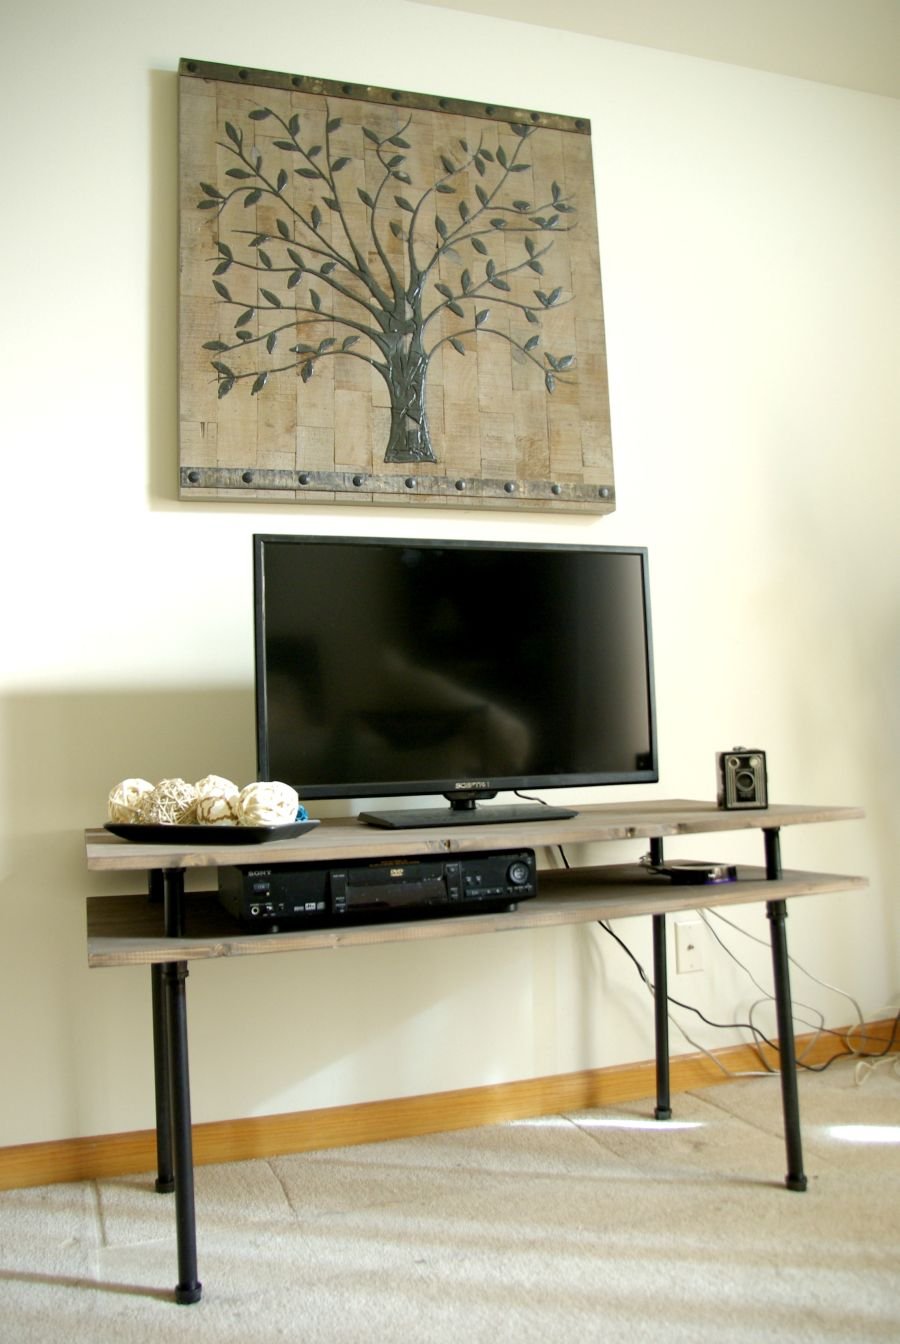 13 DIY Plans for Building a TV Stand | Guide Patterns